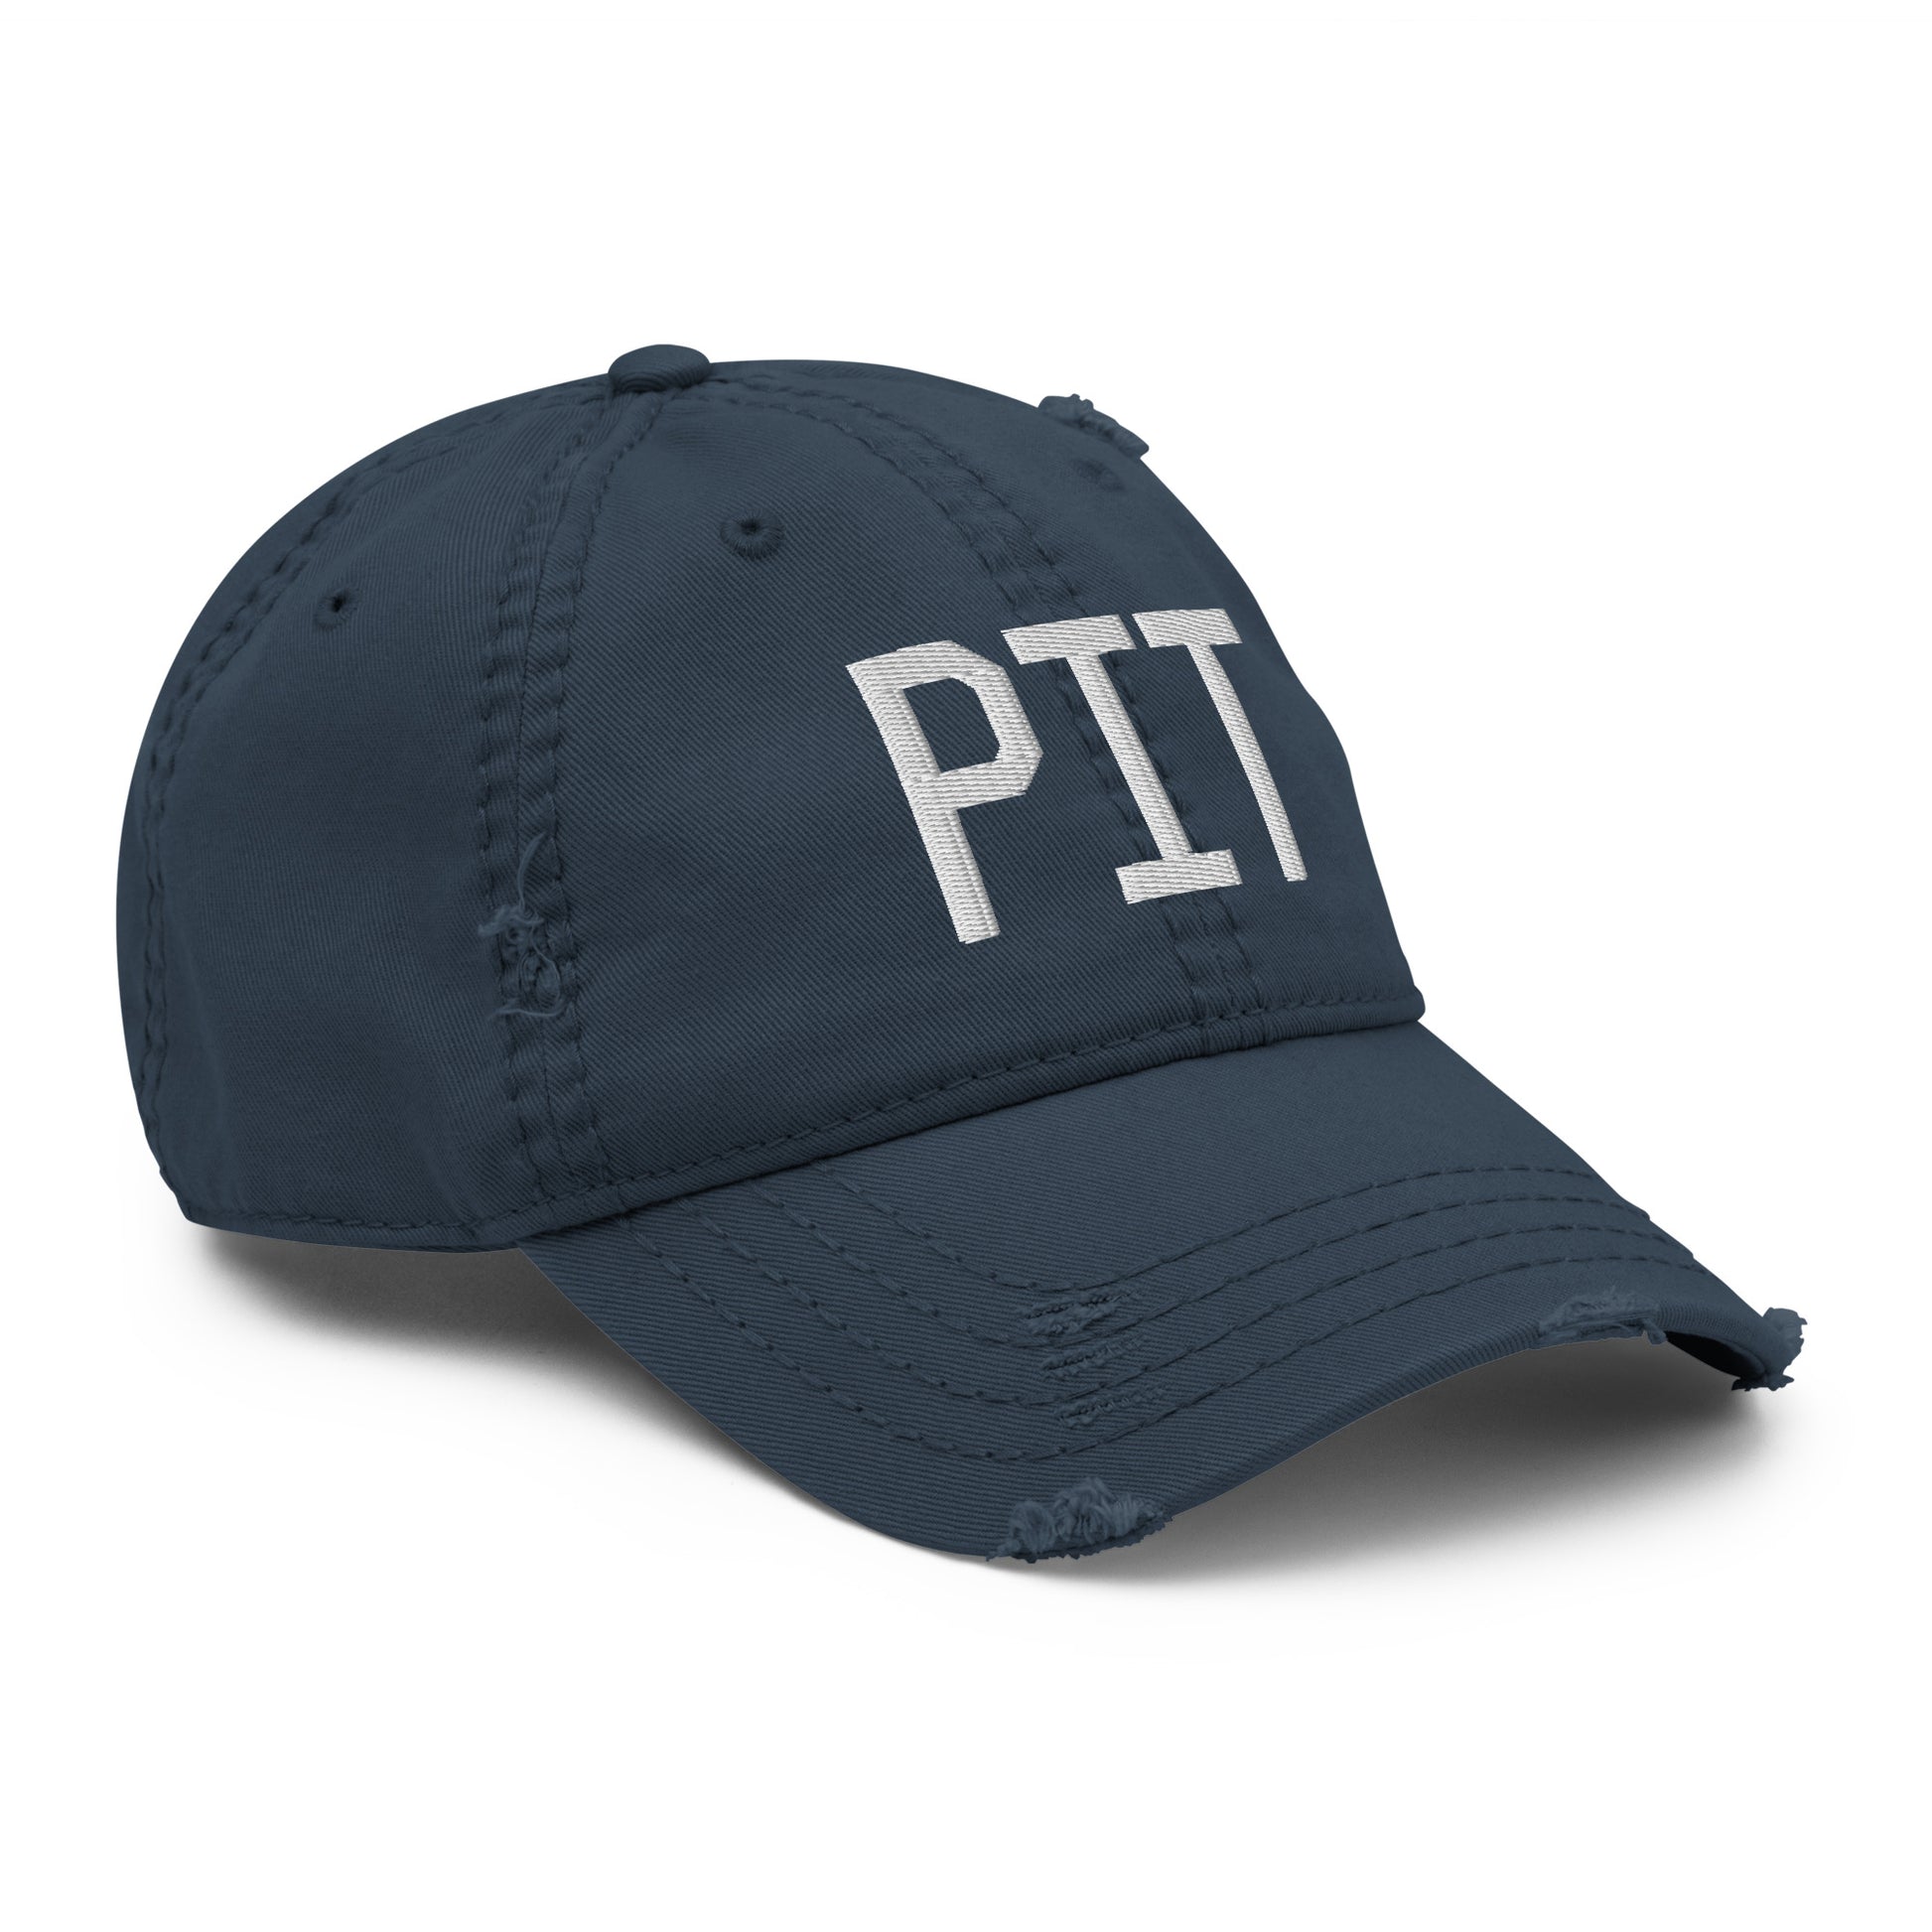 Airport Code Distressed Hat - White • PIT Pittsburgh • YHM Designs - Image 14